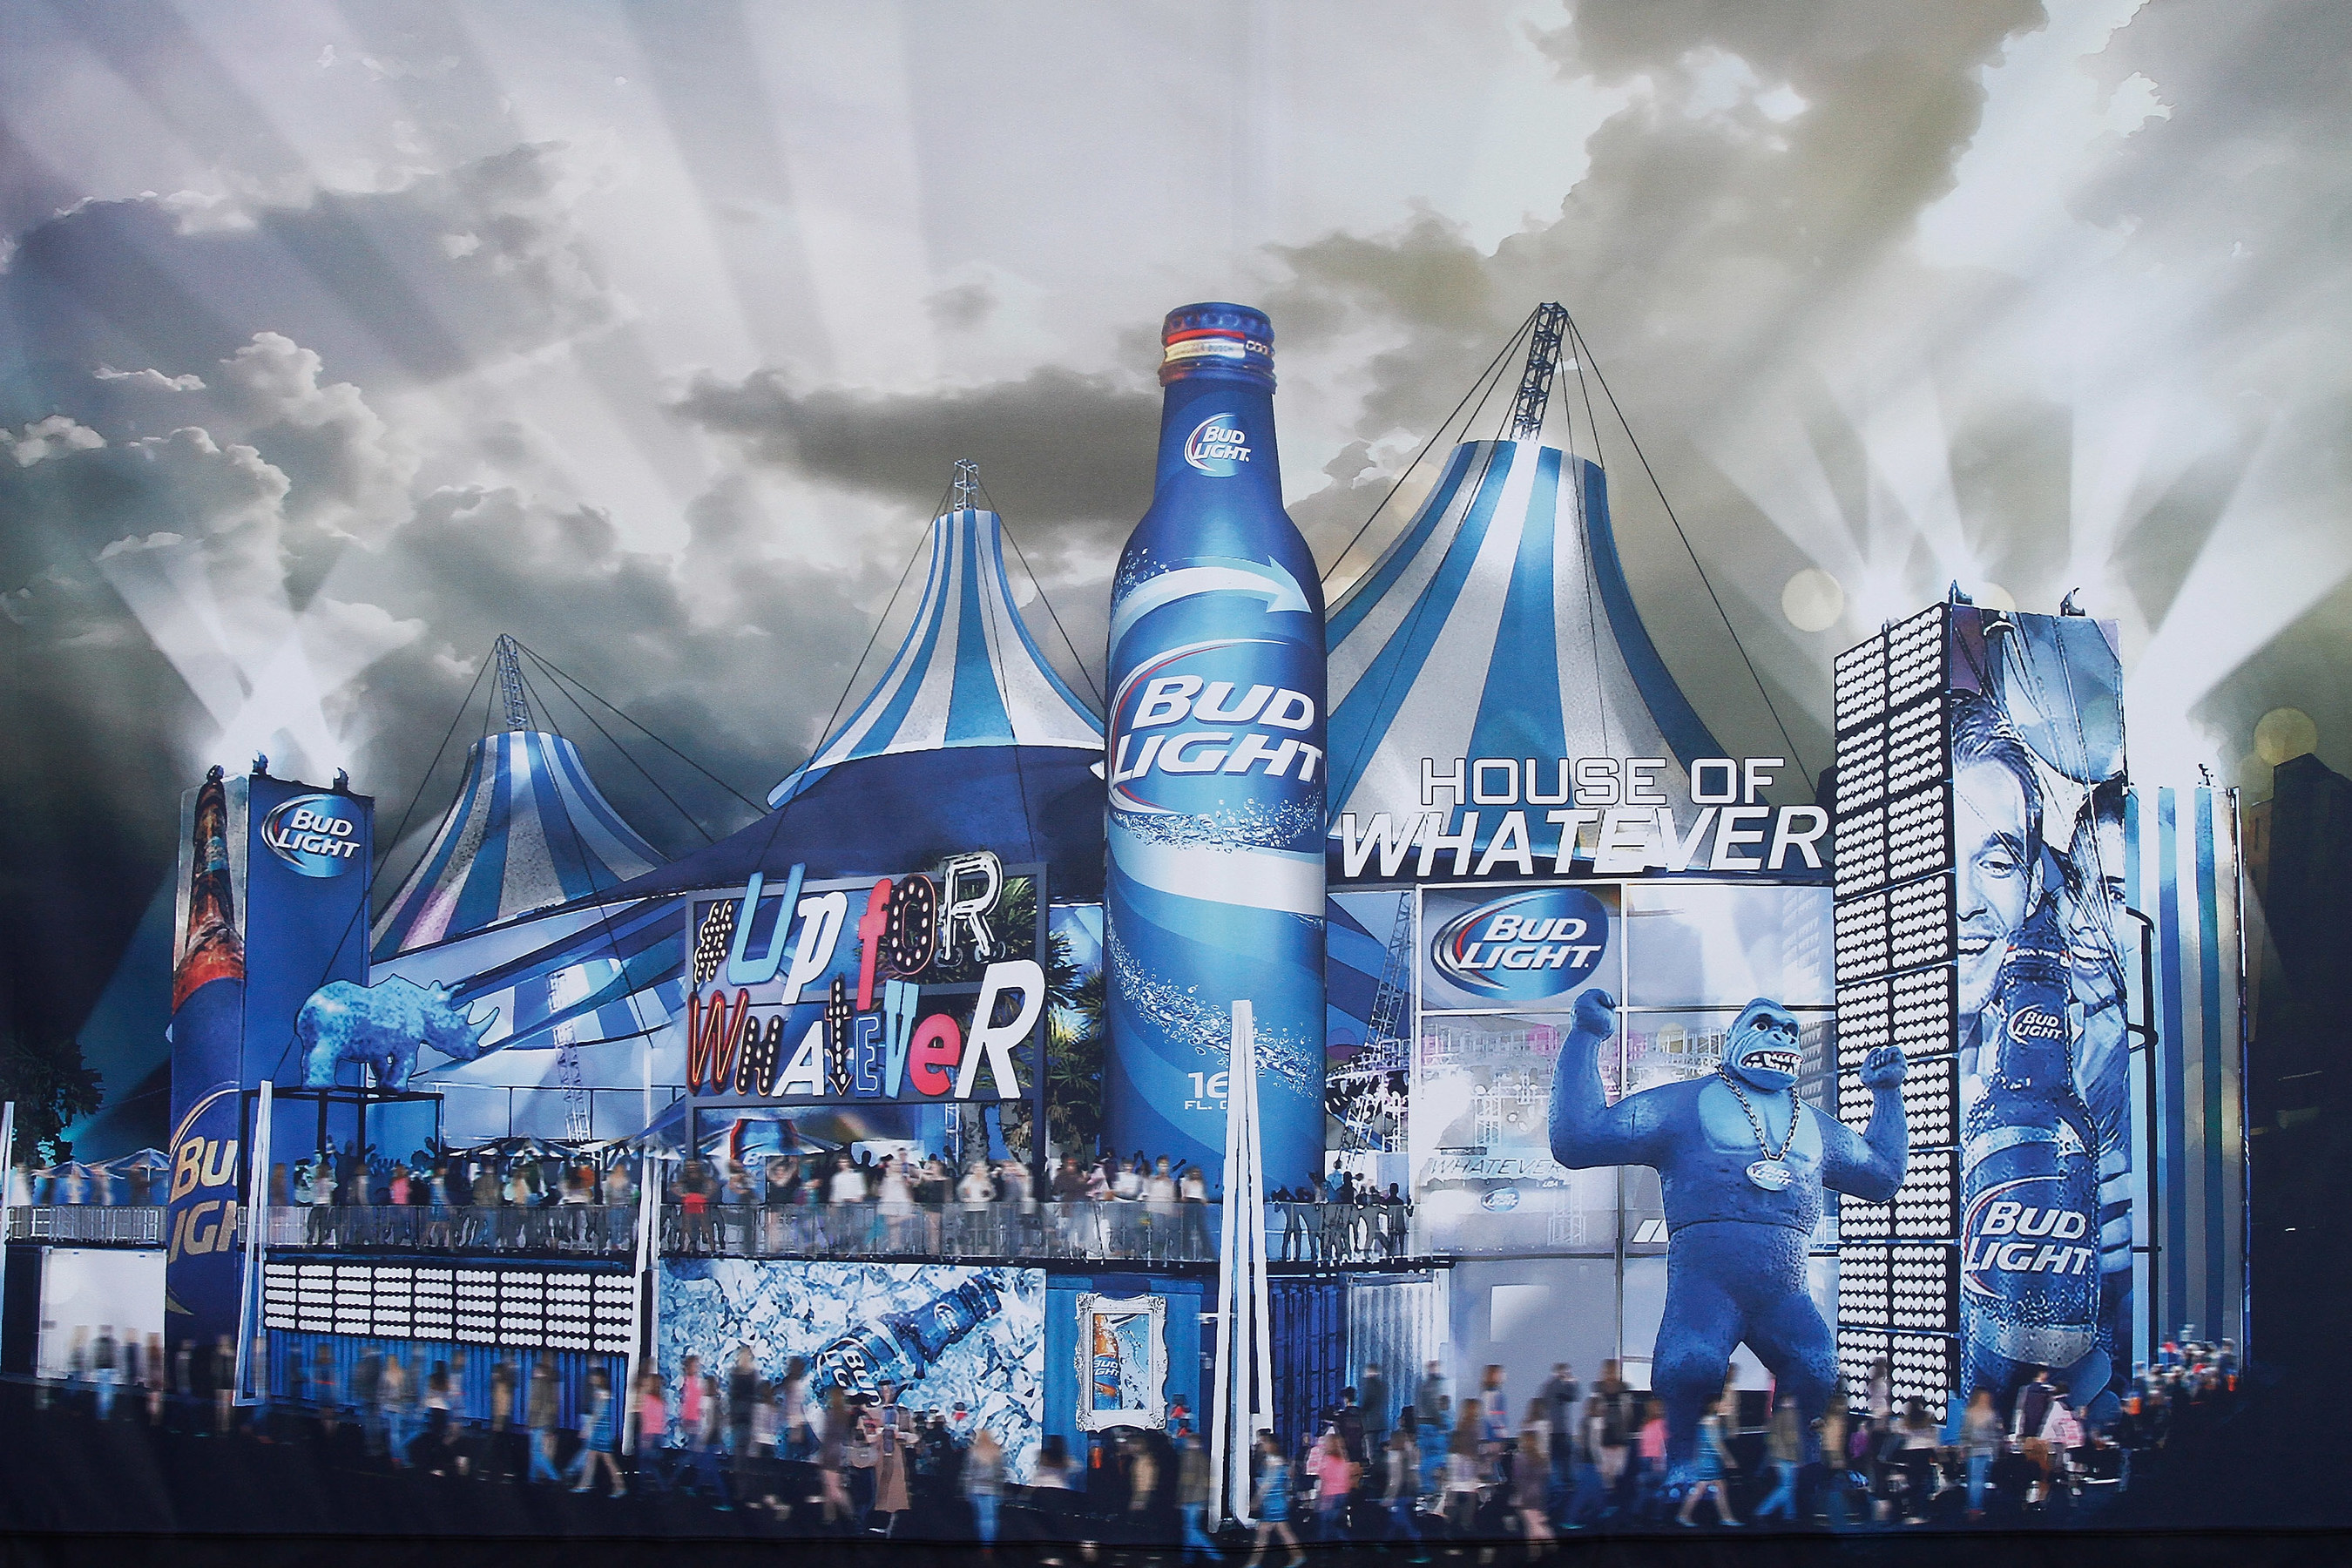 Bud Light unveils its Super Bowl XLIX plans for the first-ever Bud Light House of Whatever, the ultimate #UpForWhatever experience, featuring three days of unforgettable parties, amazing concerts and unique activities - much like Bud Light's summer activation, Whatever, USA.